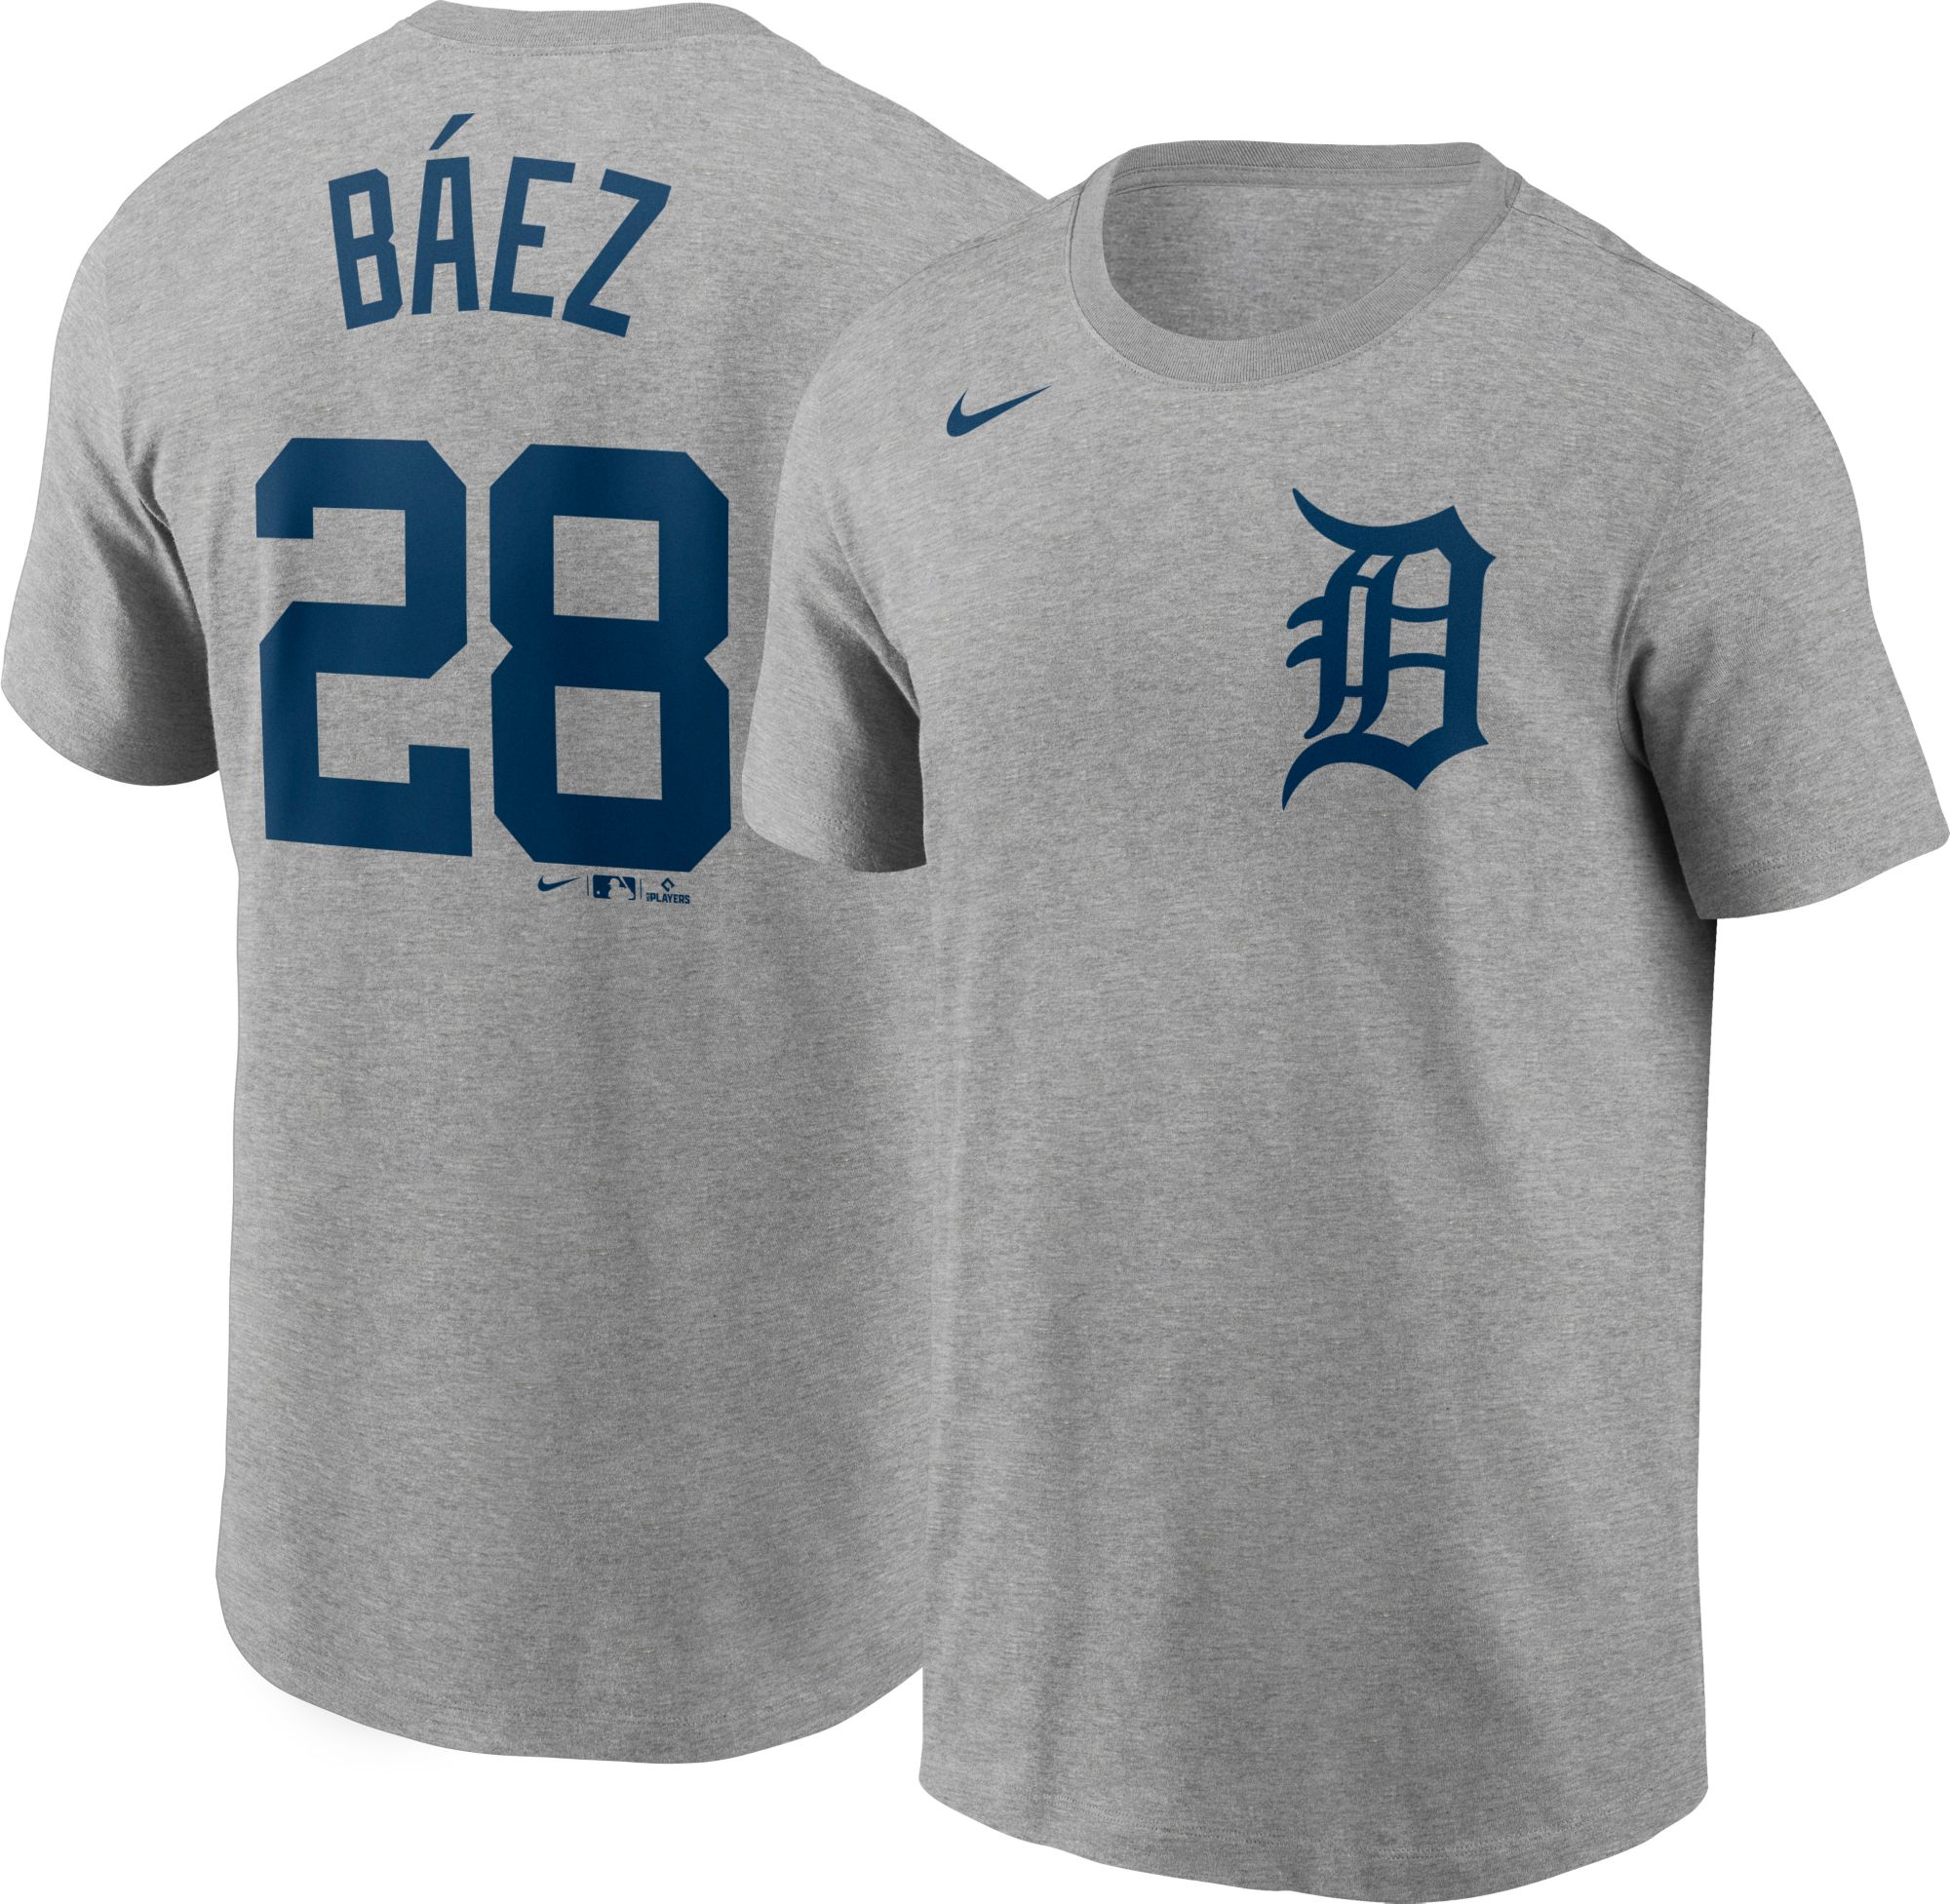 Cubs No9 Javier Baez Grey Road Stitched Youth Jersey